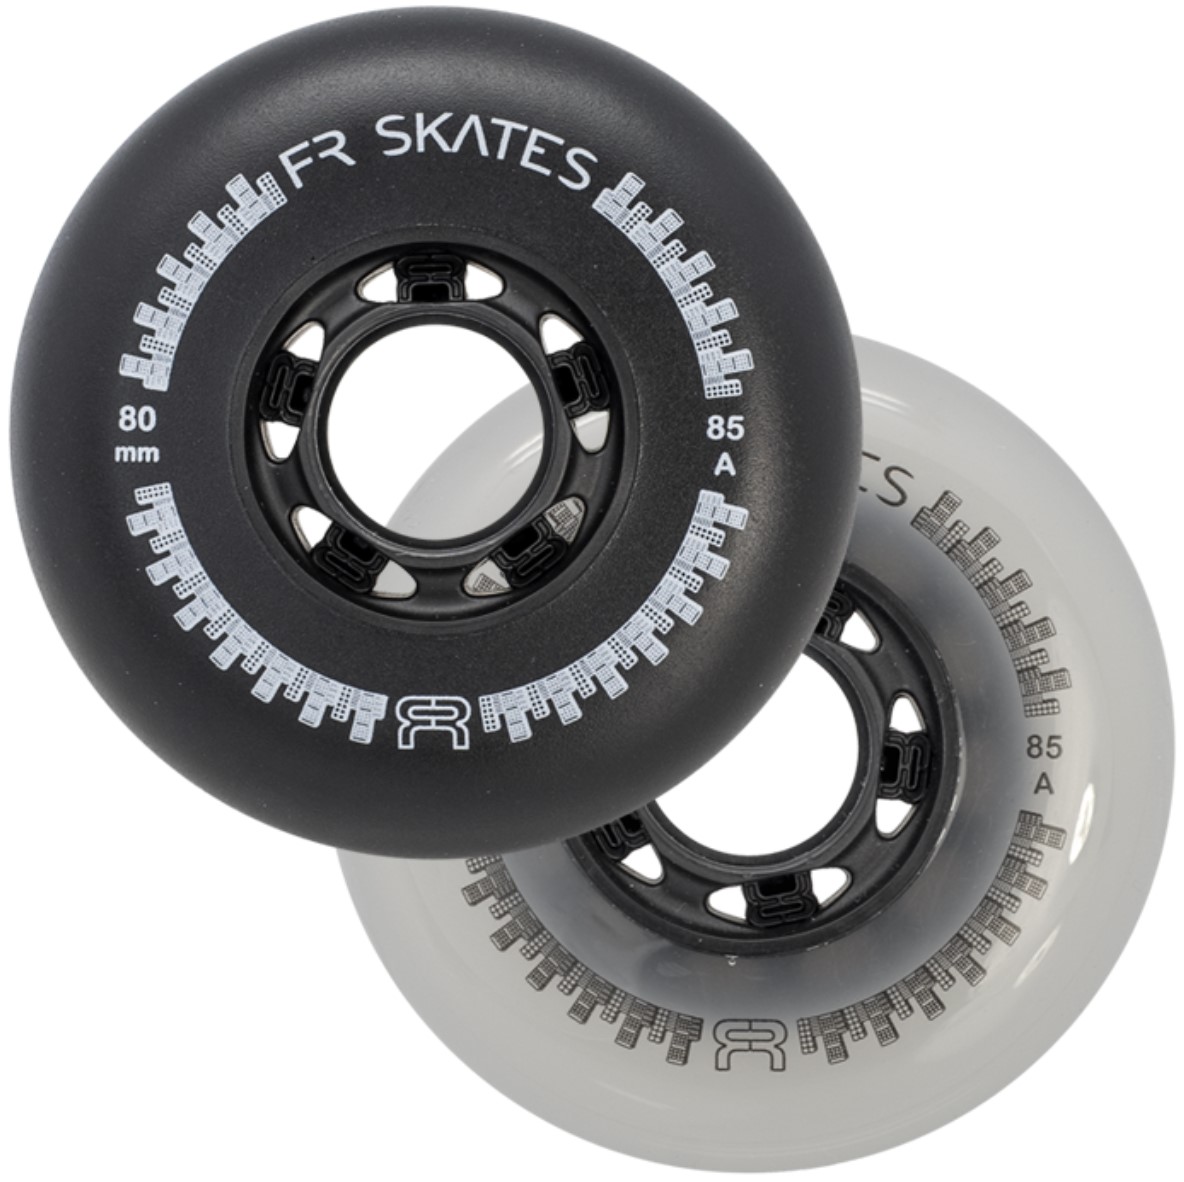 a black and a grey inline skate wheel FR downtown of 80 mm diameter and 85A durometer